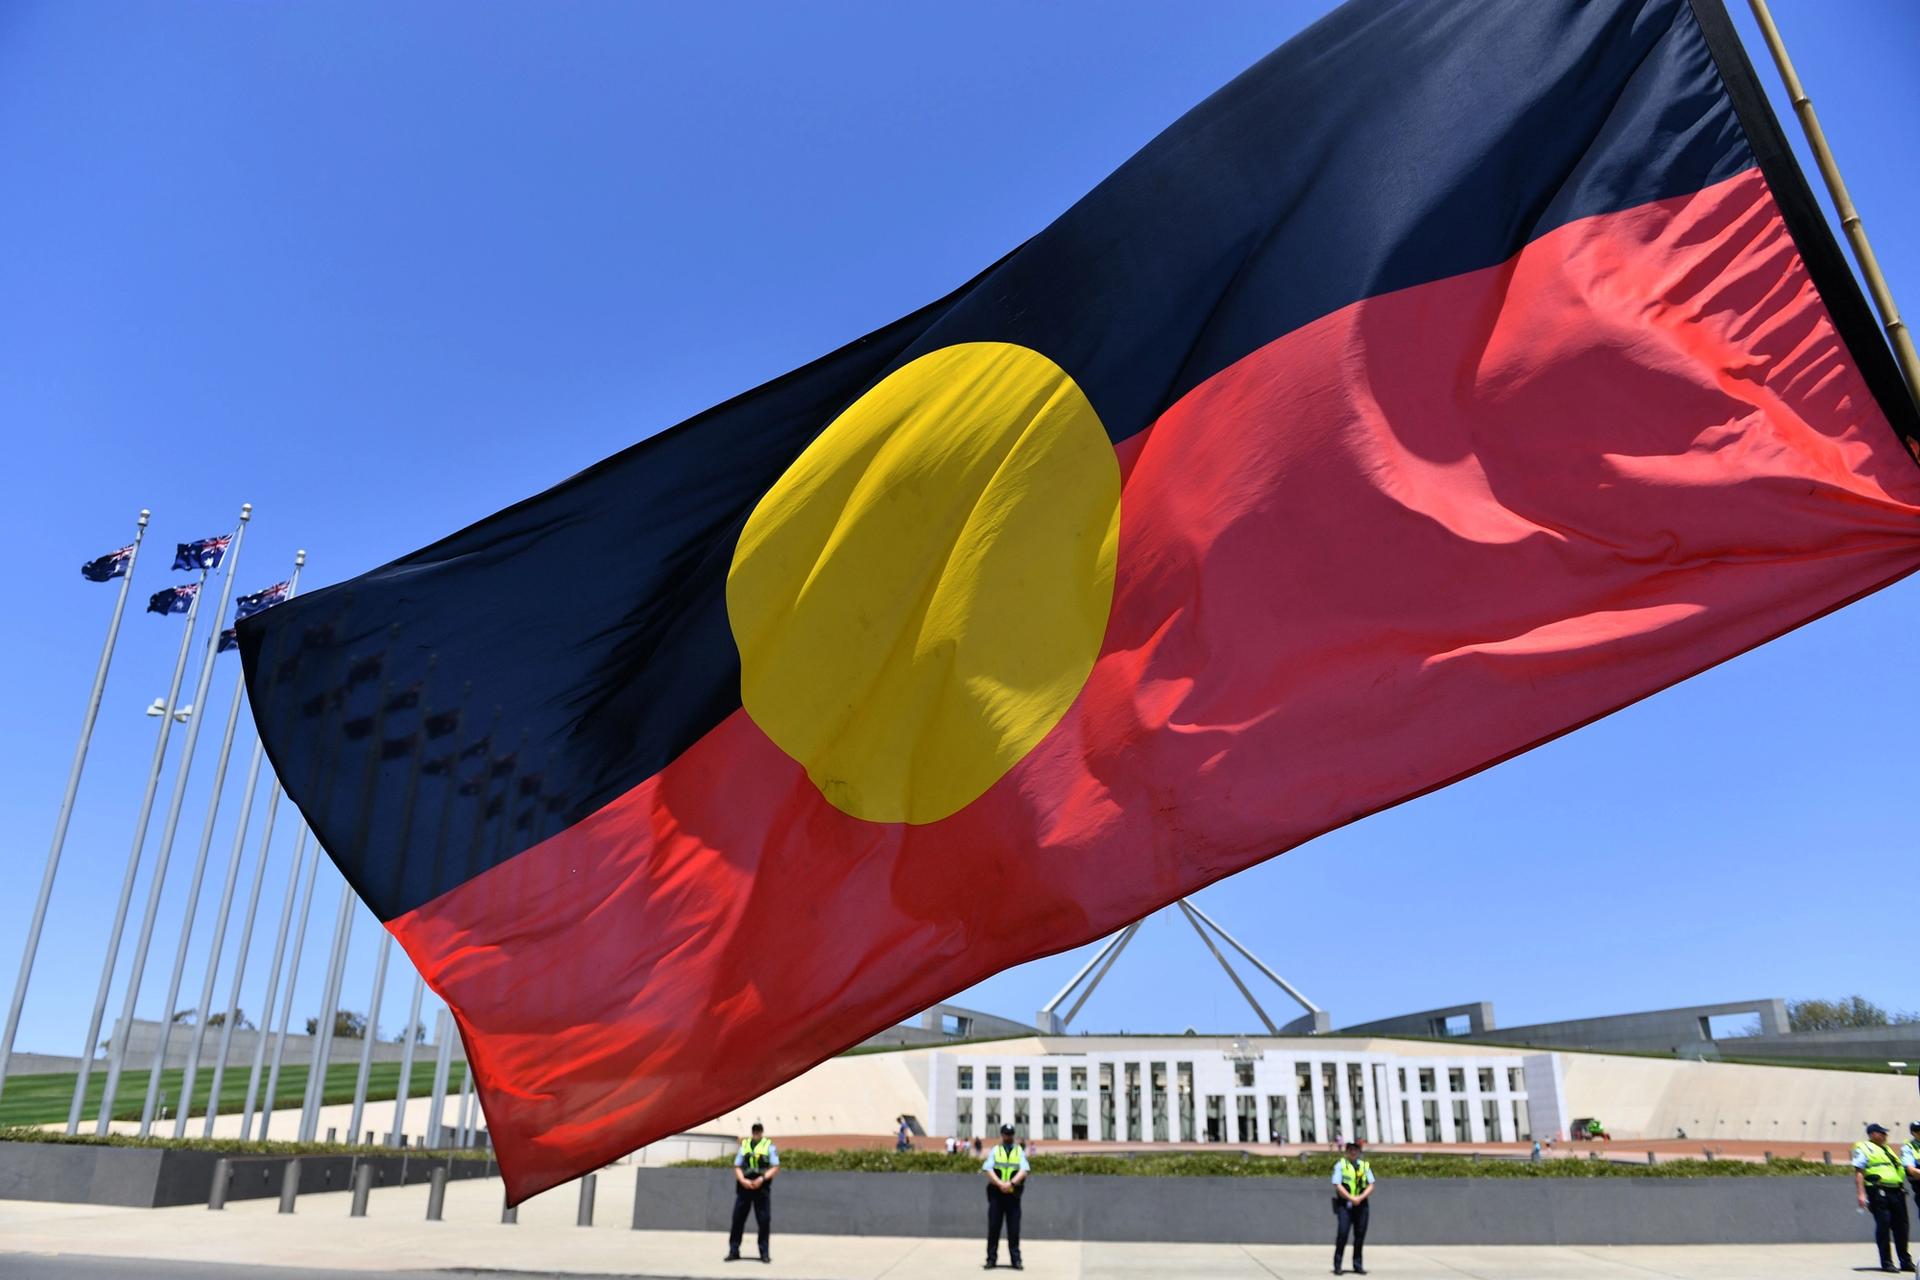 The Aboriginal flag flies at Parliament House in Canberra, Australia. MICK TSIKAS/EPA-EFE/Shutterstock